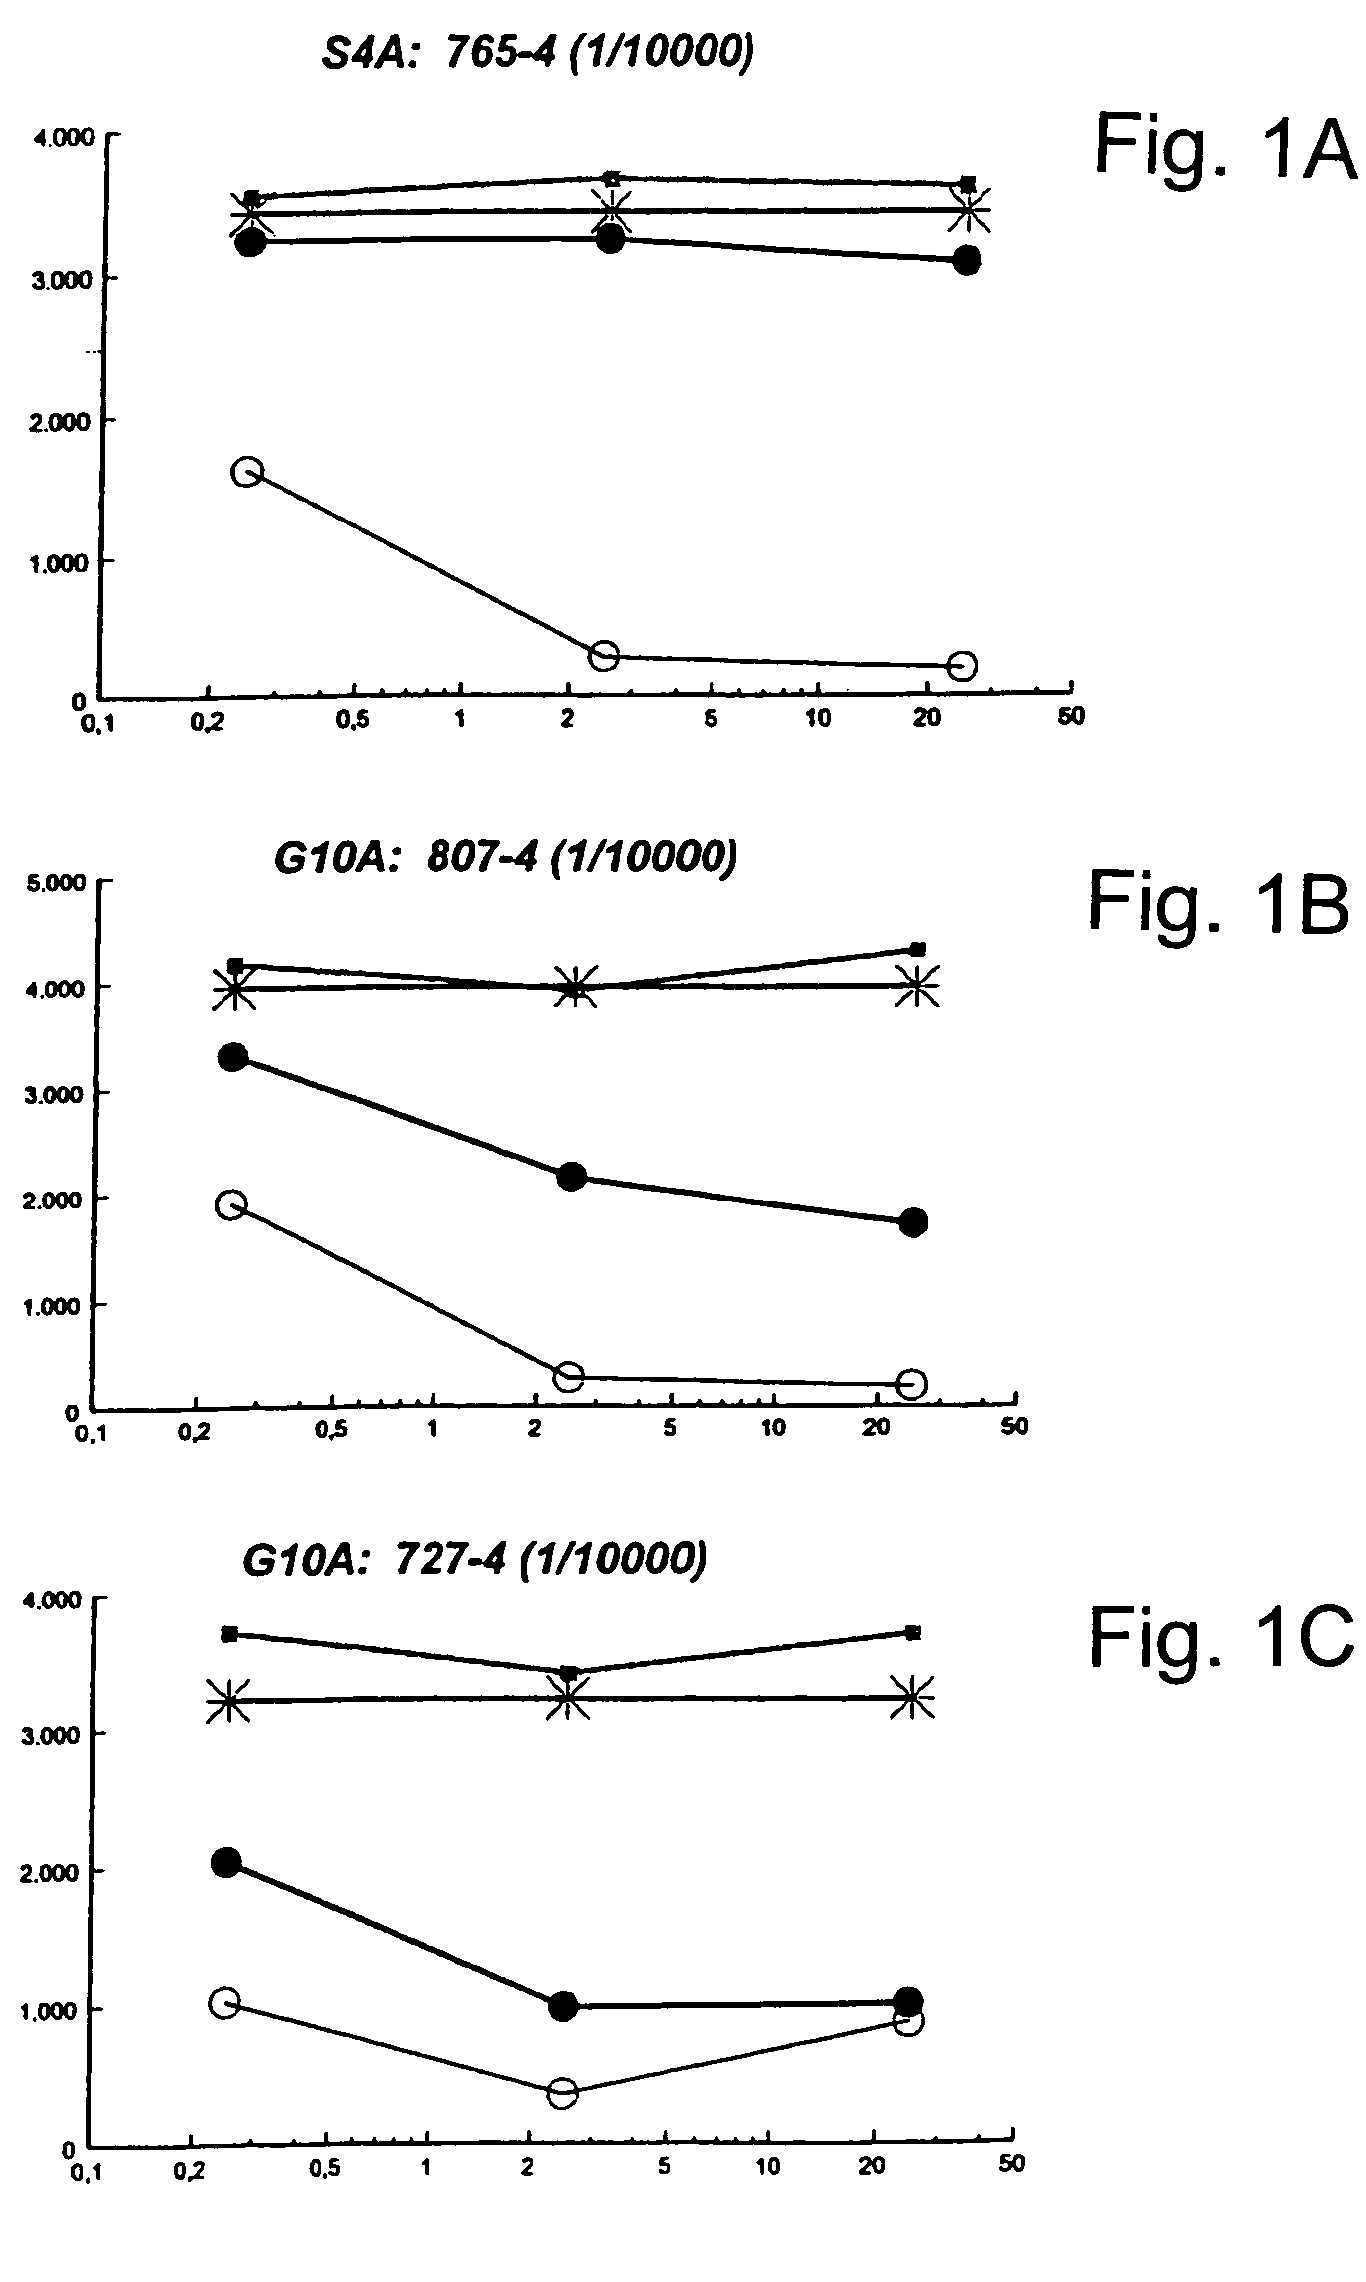 Peptide, immunogenic composition and vaccine or medical preparation, a method to immunize animals against the hormone LHRH, and analogs of the LHRH tandem repeat peptide and their use as vaccine